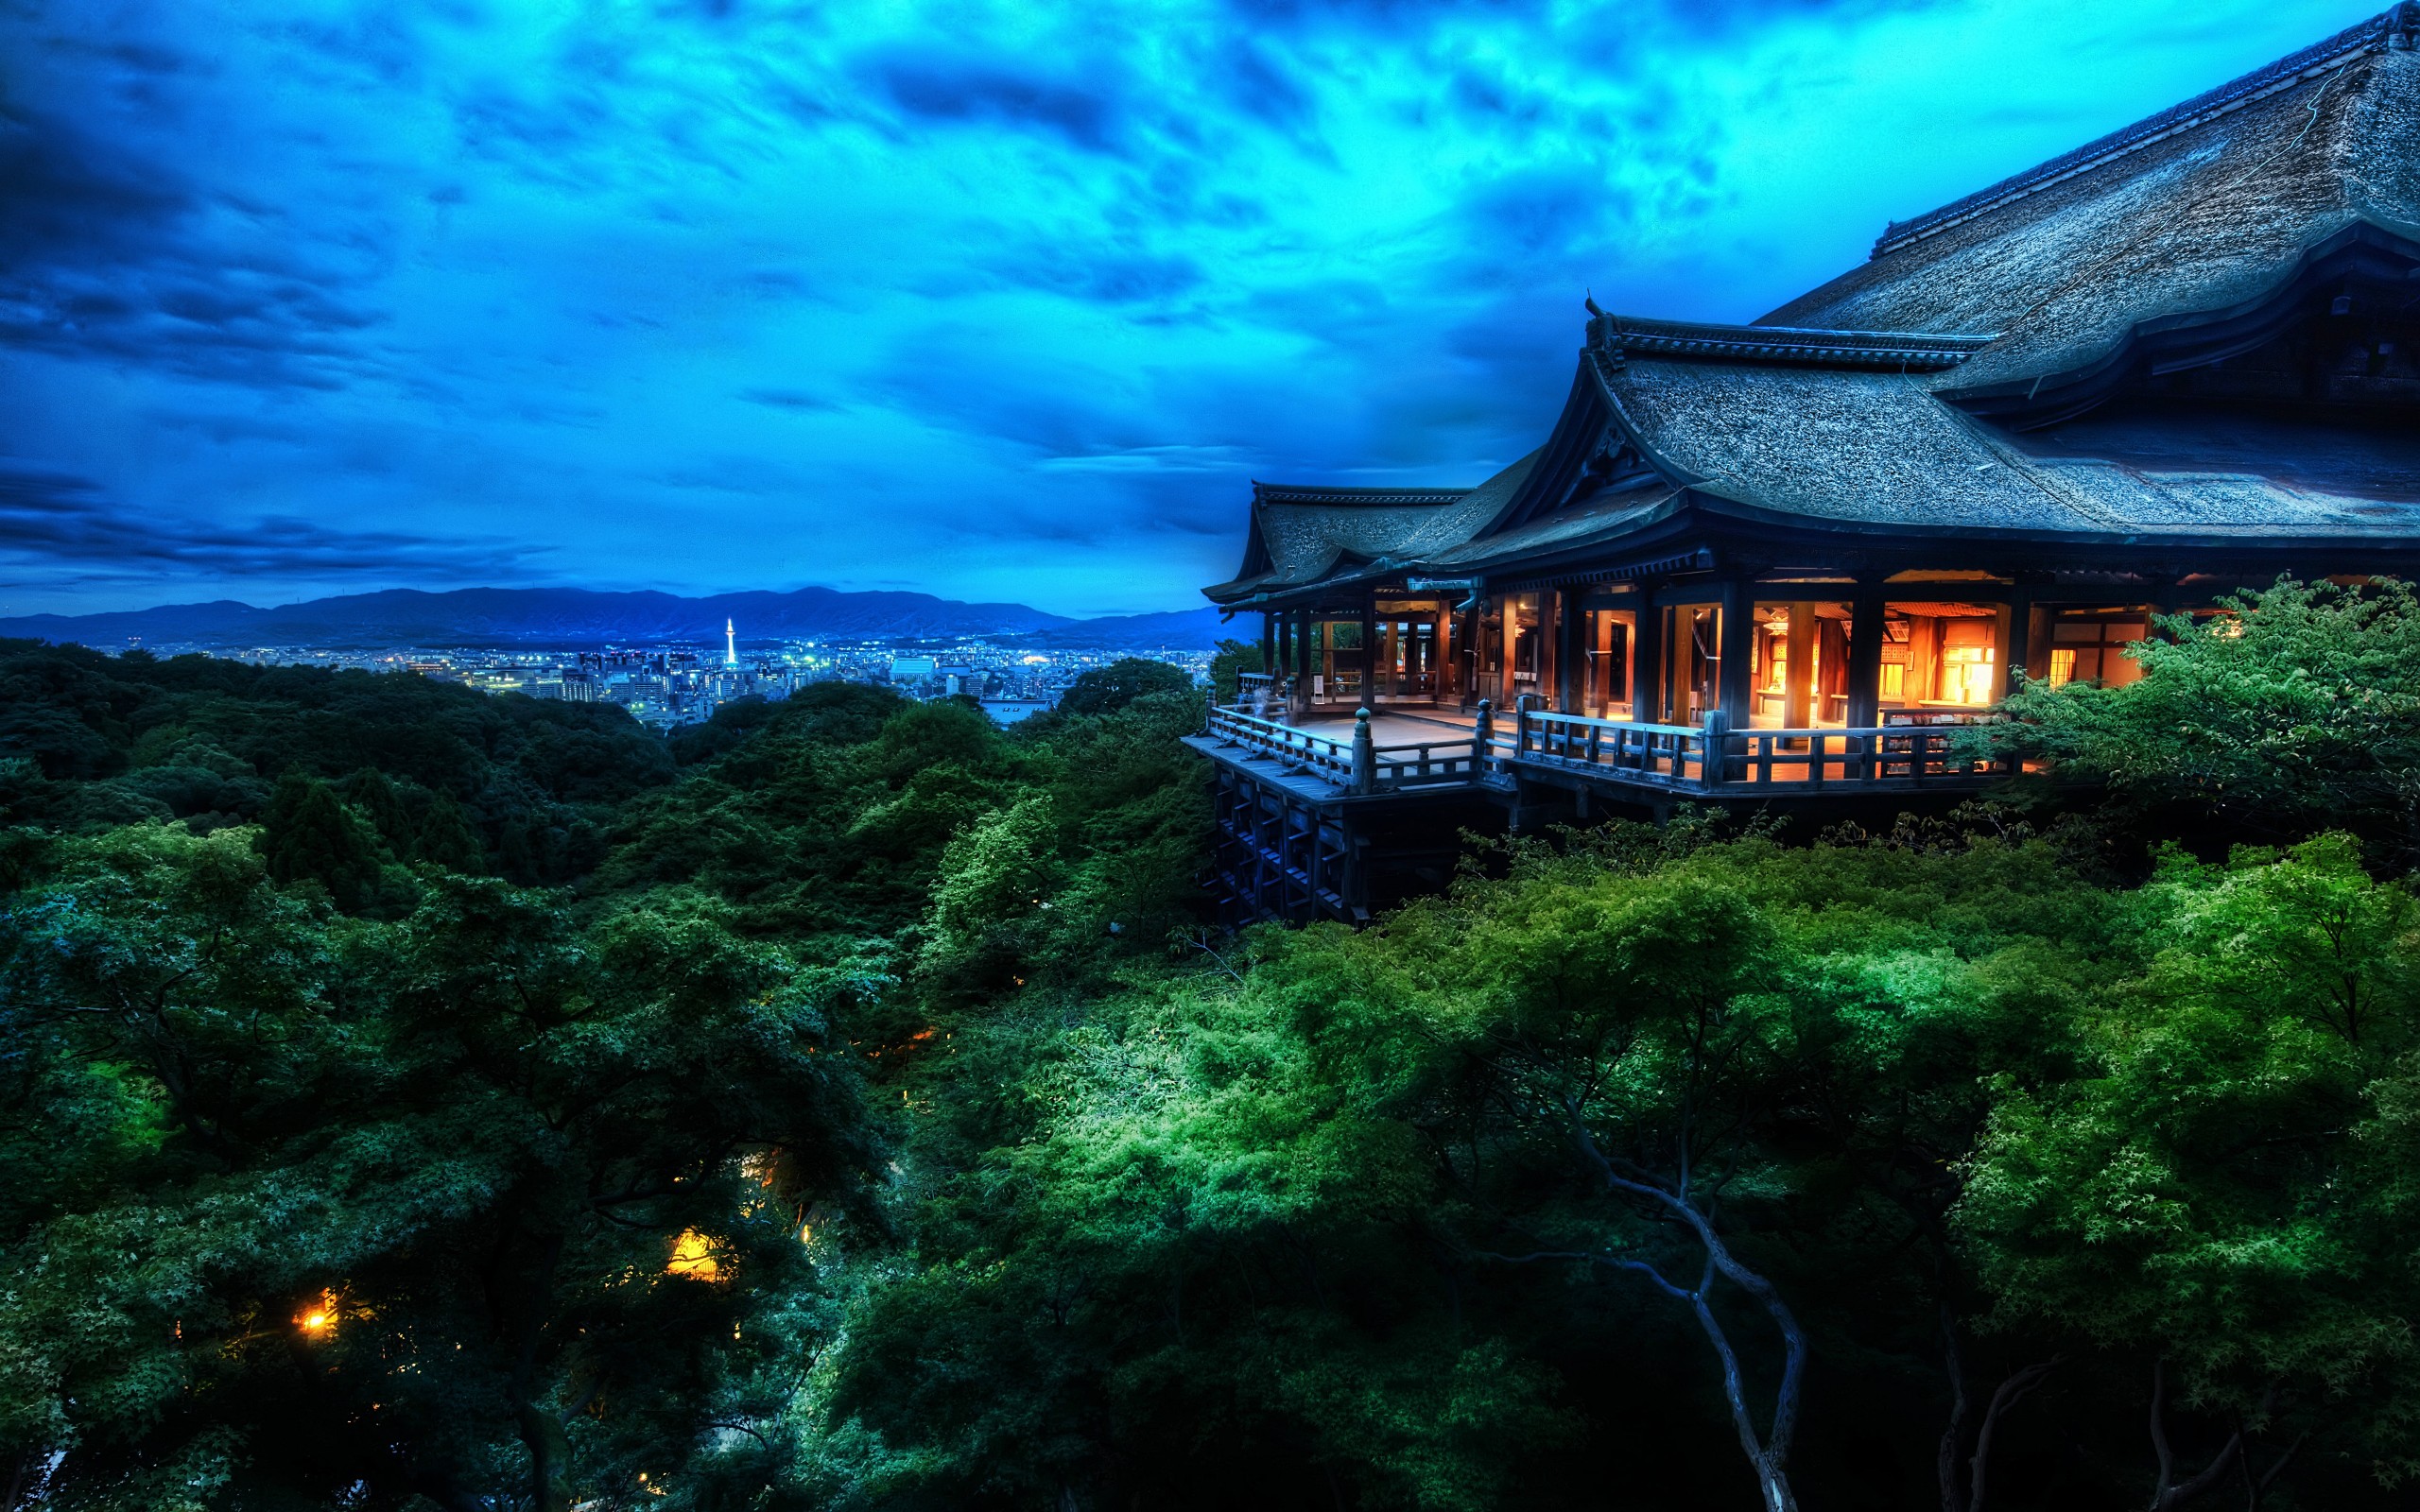 General 2560x1600 HDR trees nature lights Japan temple Asia Kyoto landscape low light